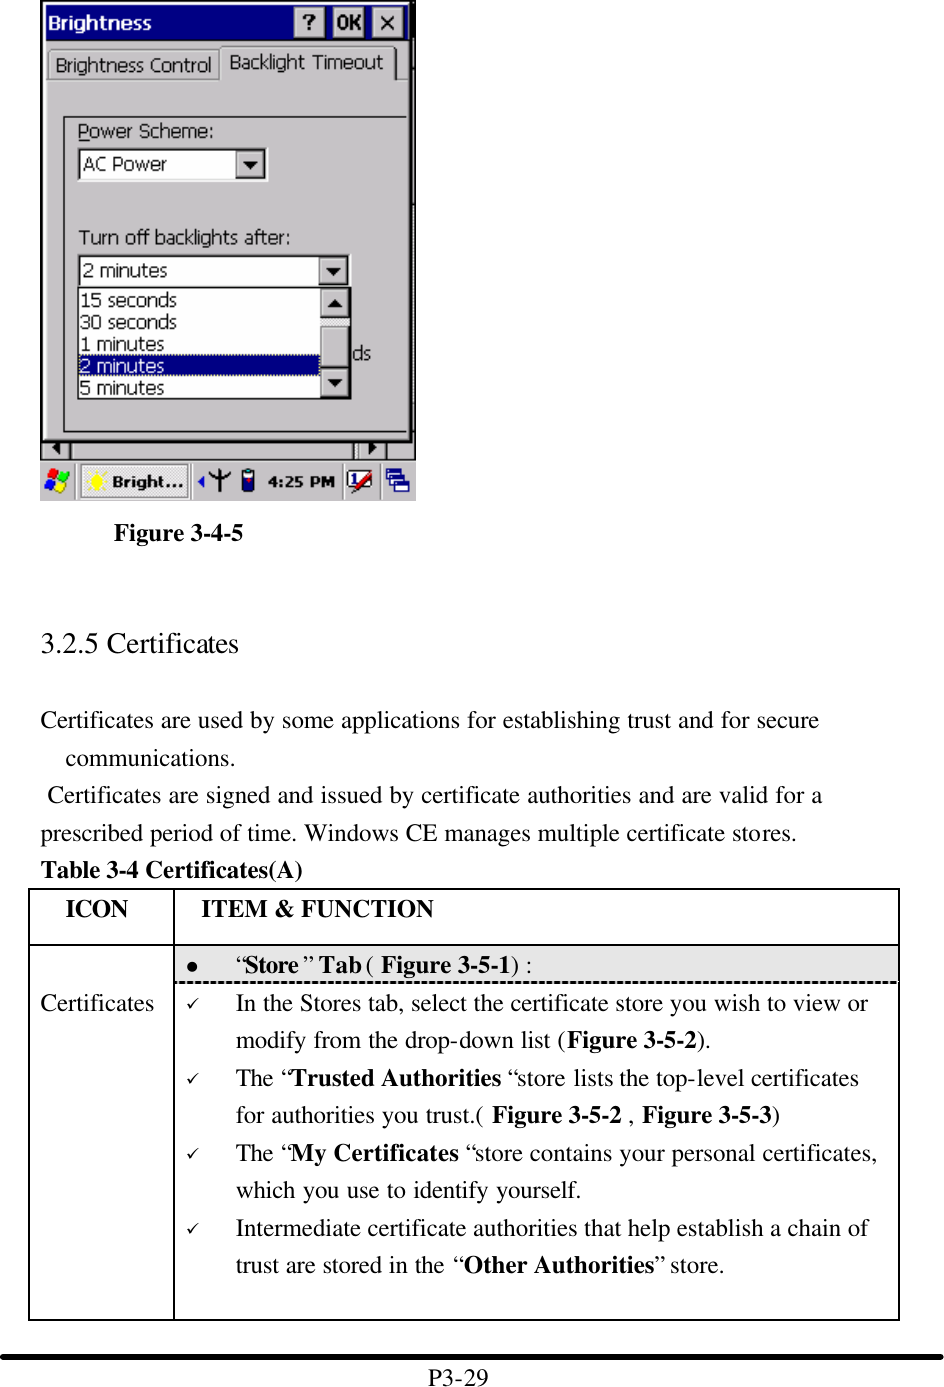    Figure 3-4-5   3.2.5 Certificates  Certificates are used by some applications for establishing trust and for secure communications.    Certificates are signed and issued by certificate authorities and are valid for a prescribed period of time. Windows CE manages multiple certificate stores. Table 3-4 Certificates(A)   ICON  ITEM &amp; FUNCTION l “Store ” Tab ( Figure 3-5-1) :    Certificates ü In the Stores tab, select the certificate store you wish to view or modify from the drop-down list (Figure 3-5-2).   ü The “Trusted Authorities “store lists the top-level certificates for authorities you trust.( Figure 3-5-2 , Figure 3-5-3)   ü The “My Certificates “store contains your personal certificates, which you use to identify yourself.   ü Intermediate certificate authorities that help establish a chain of trust are stored in the “Other Authorities” store.  P3-29 